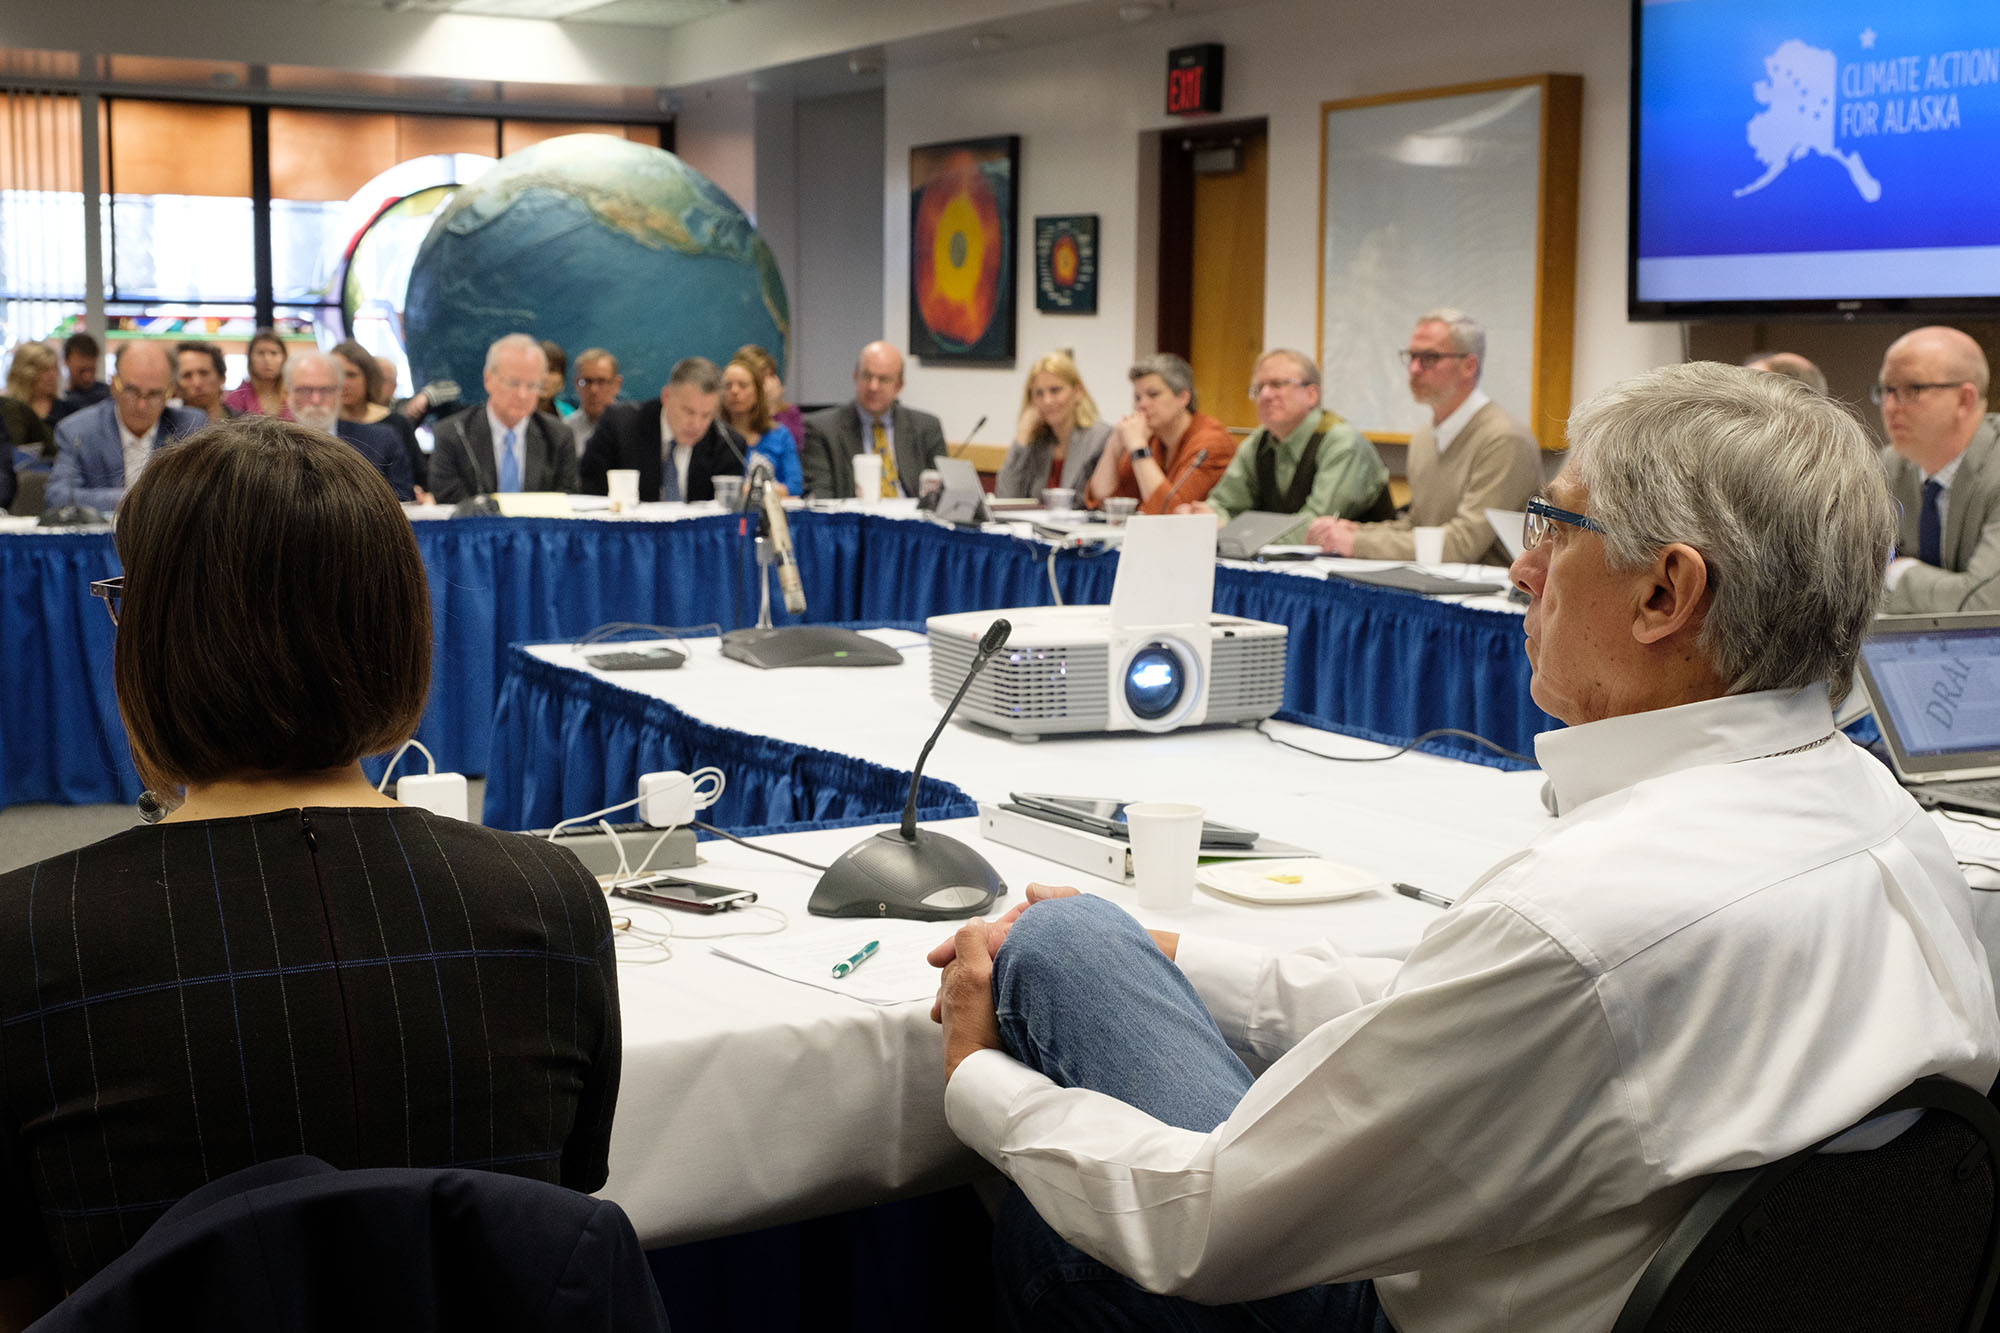 Meeting of Governor Walker's Climate Action Leadership team, chaired by Lieutenant Governor Byron Mallott, on the University of Alaska Fairbanks Campus, in Fairbanks, Alaska, April 12, 2018. (Photo by David Lienemann/Office of Governor Bill Walker)